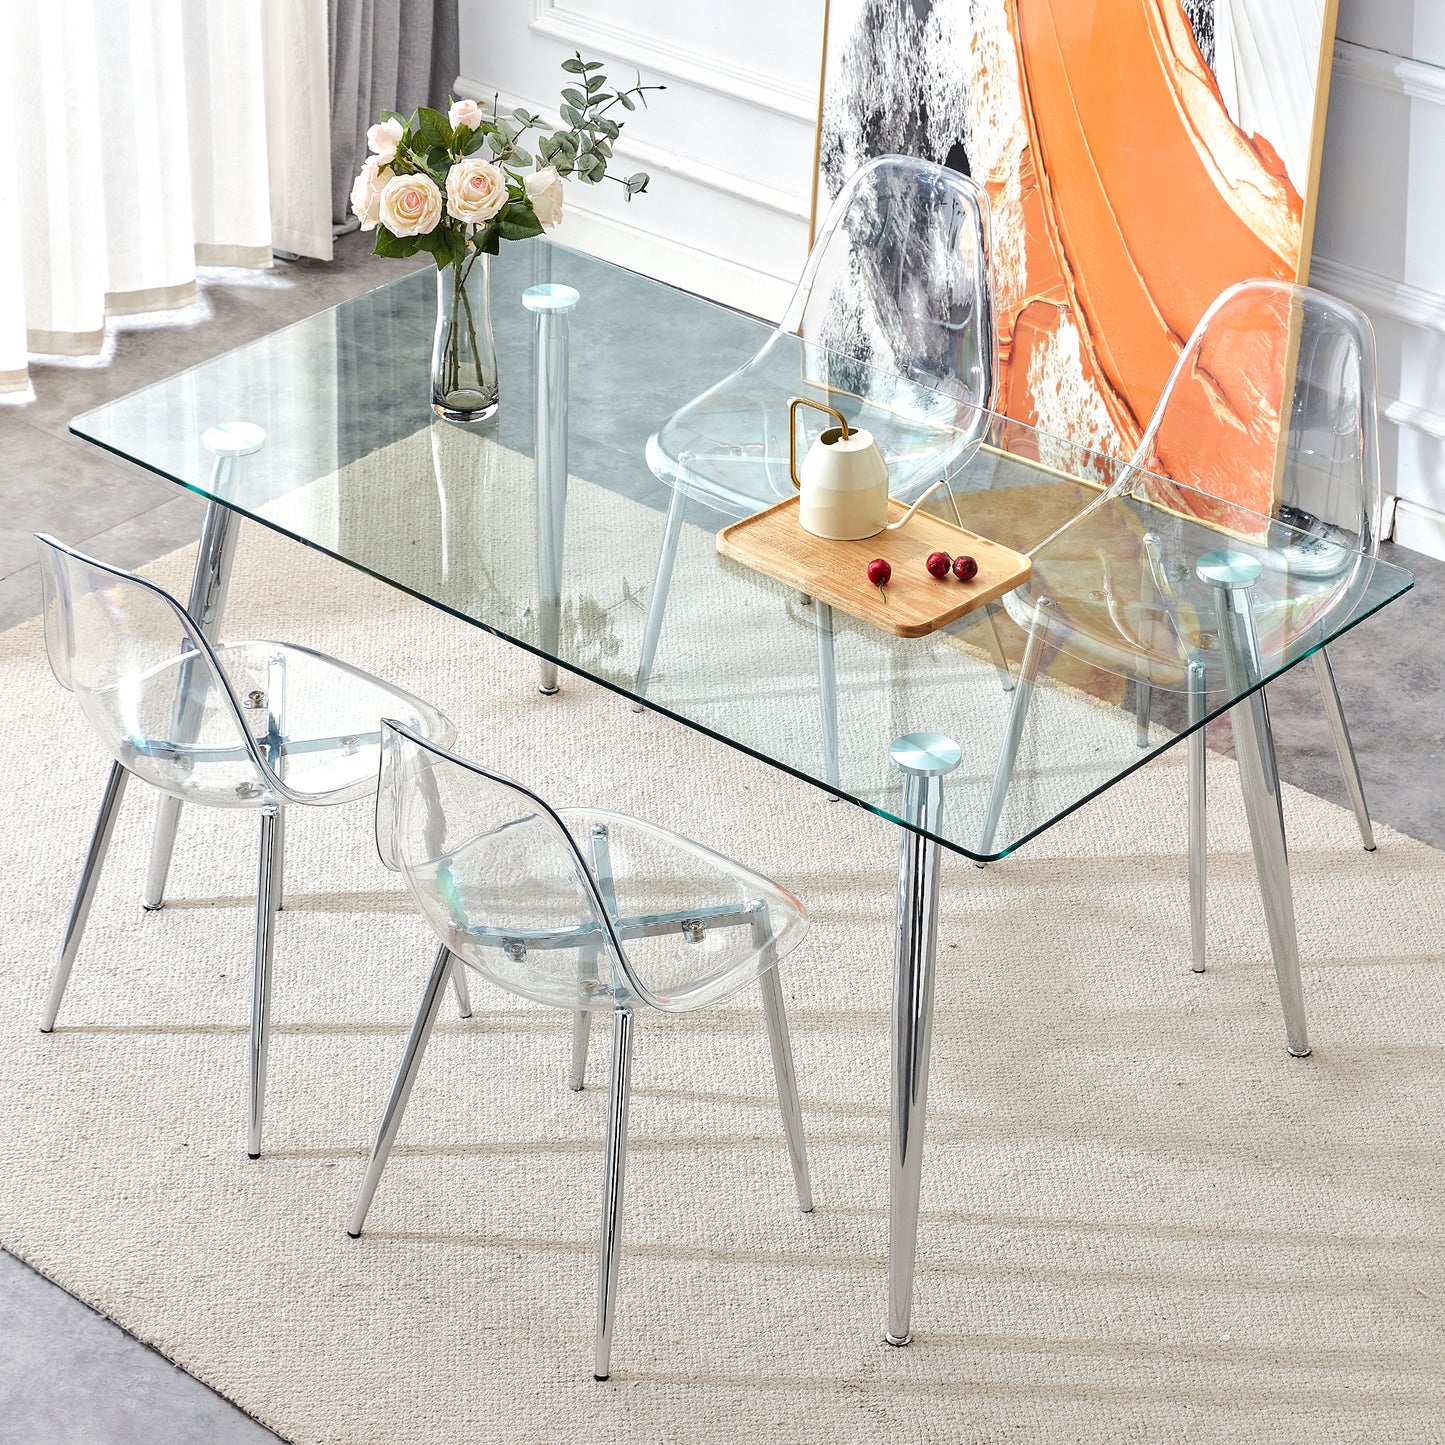 Modern minimalist rectangular glass dining table, 0.4 inch thick transparent tempered glass tabletop and silver metal legs, suitable for kitchens, restaurants, and living rooms 63"*35.4"*30"DT-1544